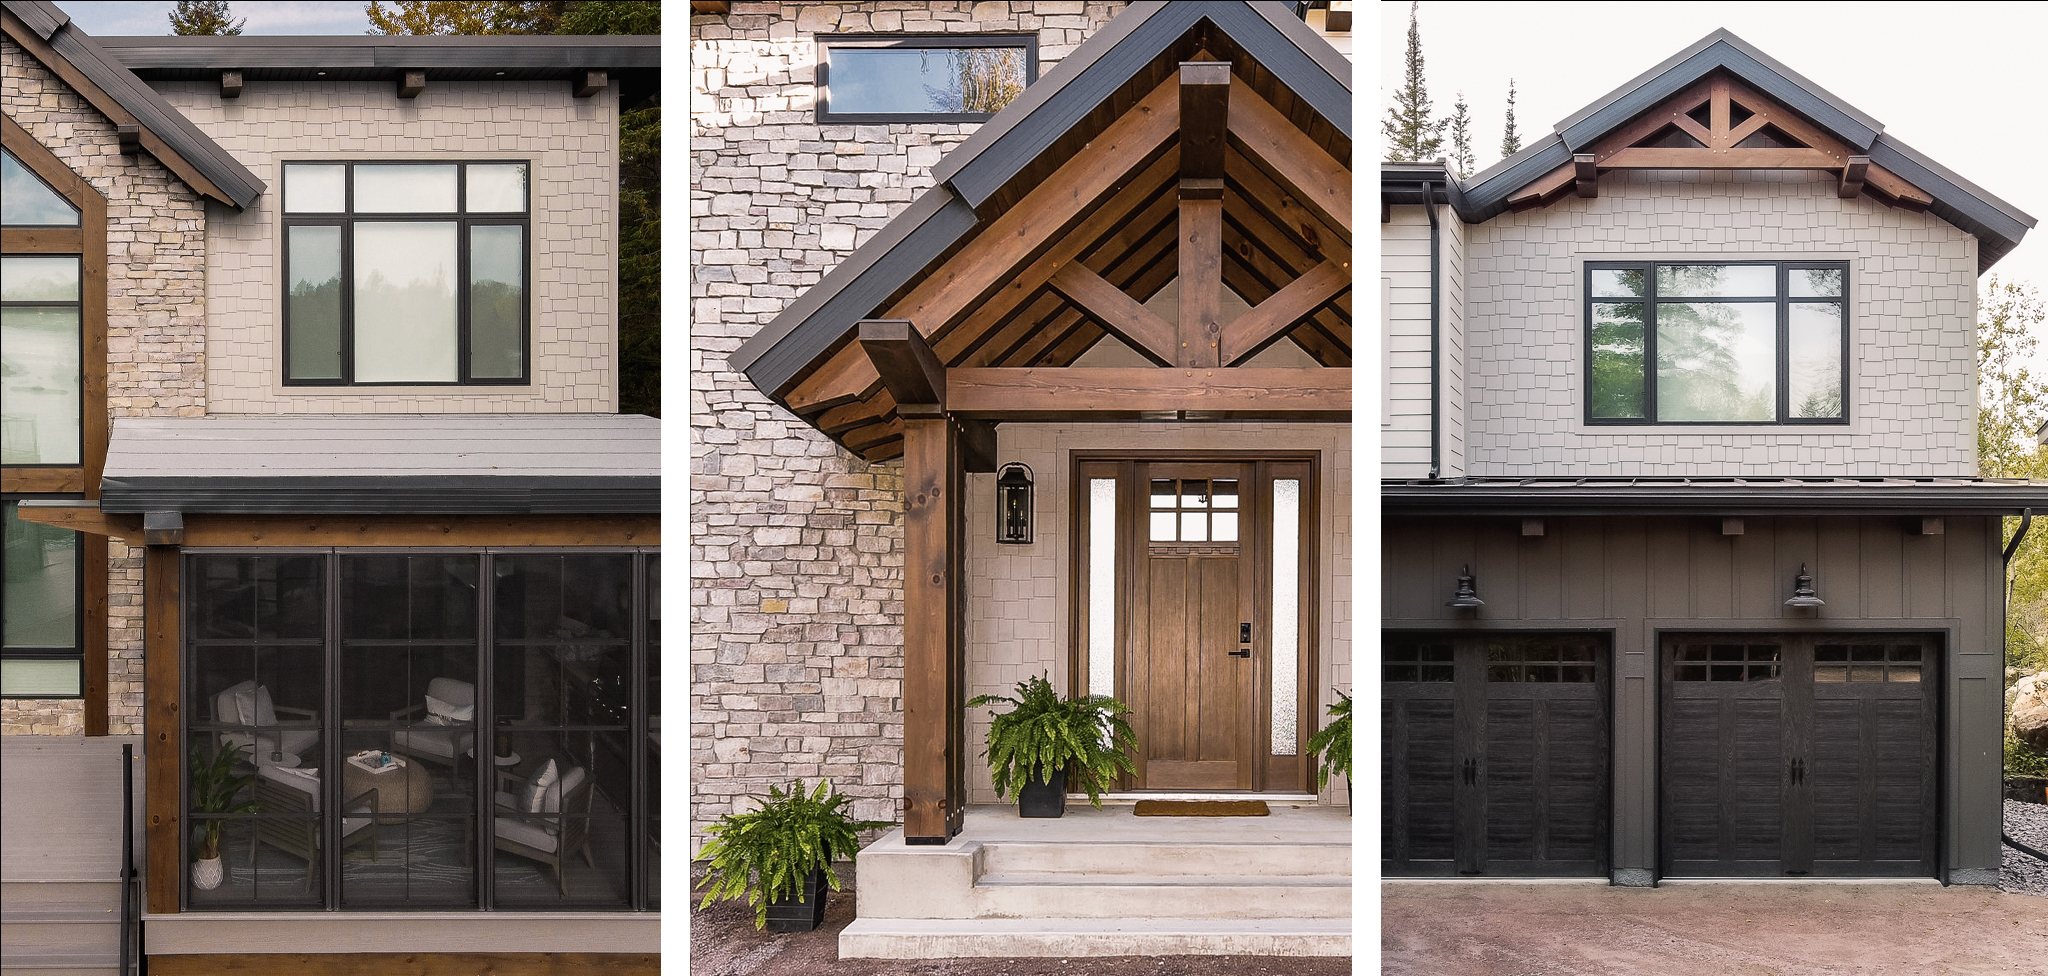 STYLE to Consider When Selecting Your Exterior Materials